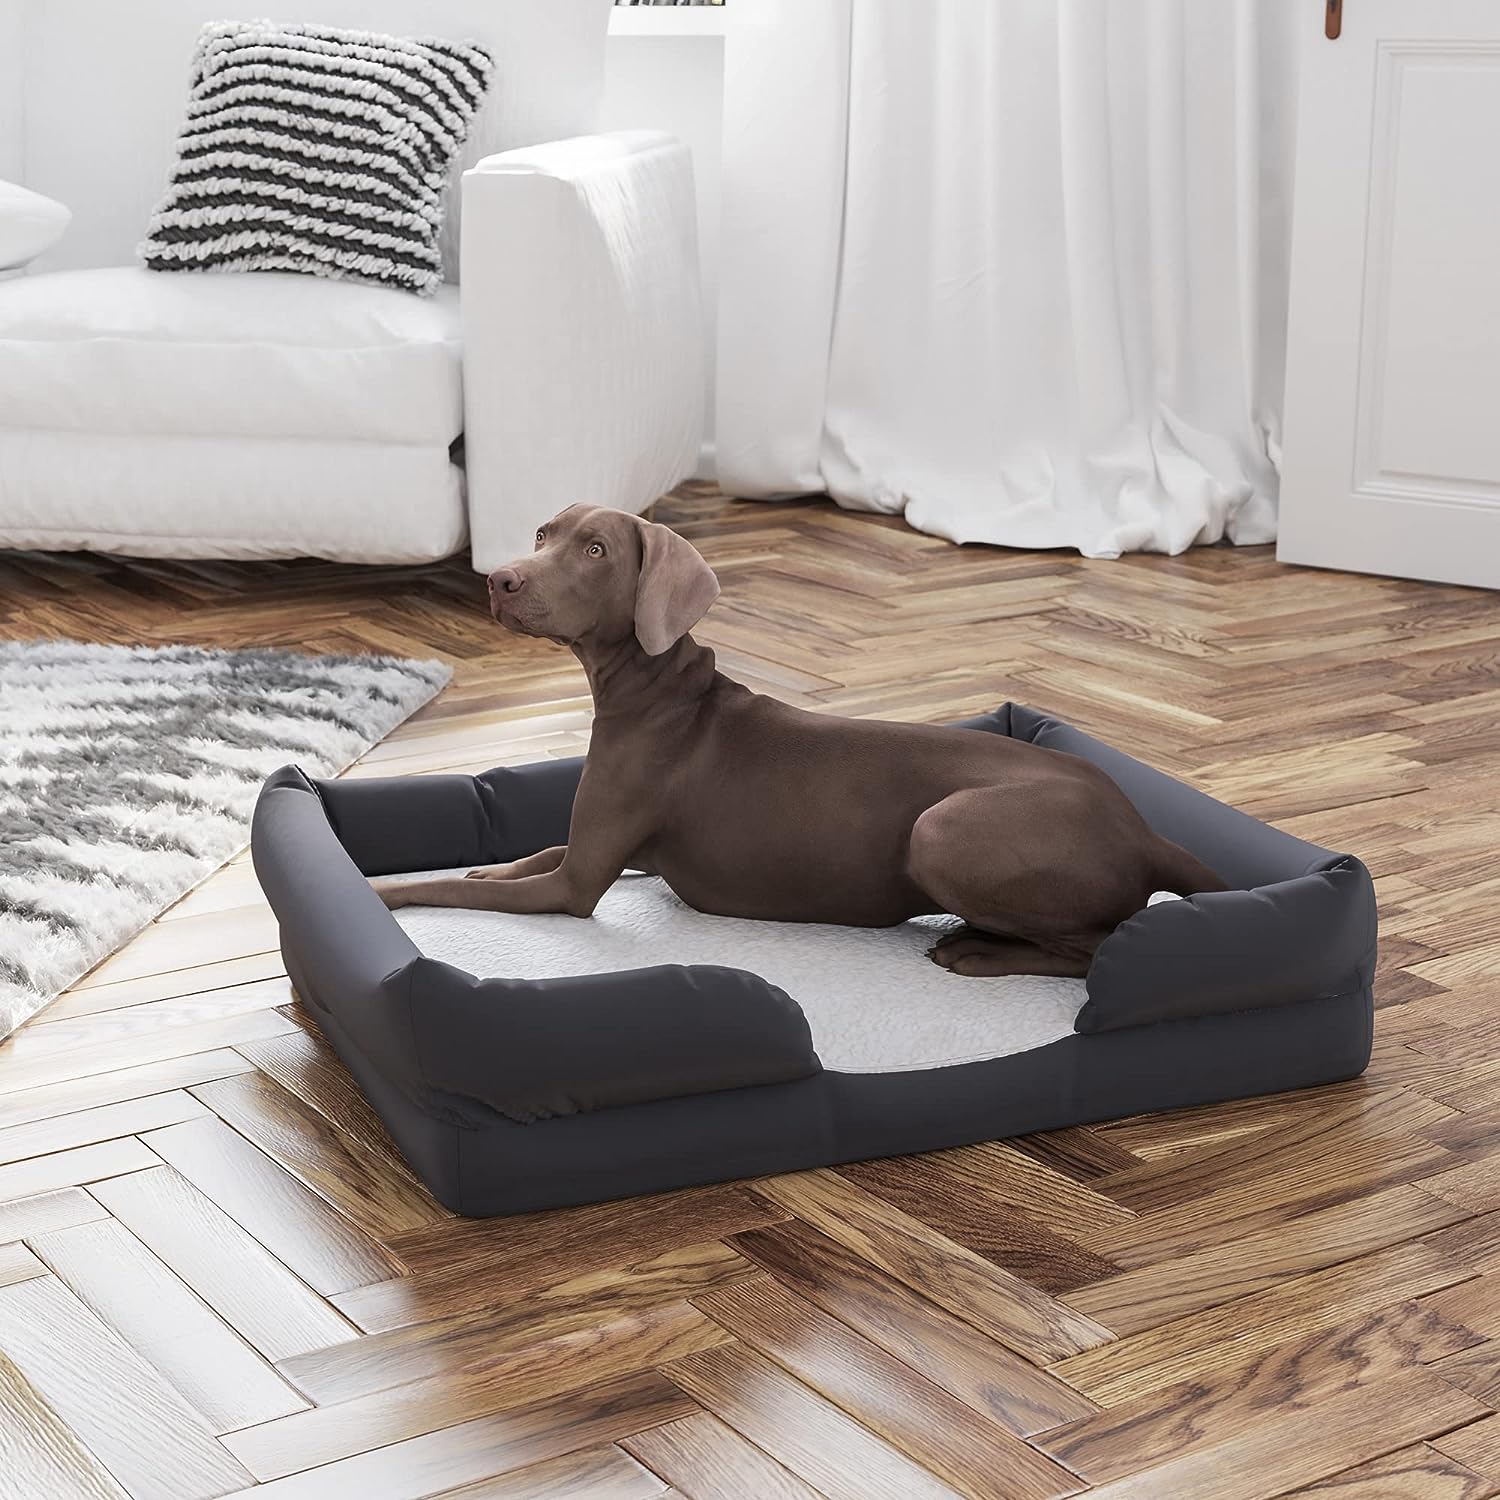 Flash Furniture Cooper Gray Orthopedic Bolster Dog Bed - Memory Foam Base for Dogs up to 25 LBS. - Ultra-Soft White Olefin Sleep Surface - Removable, Washable Cover